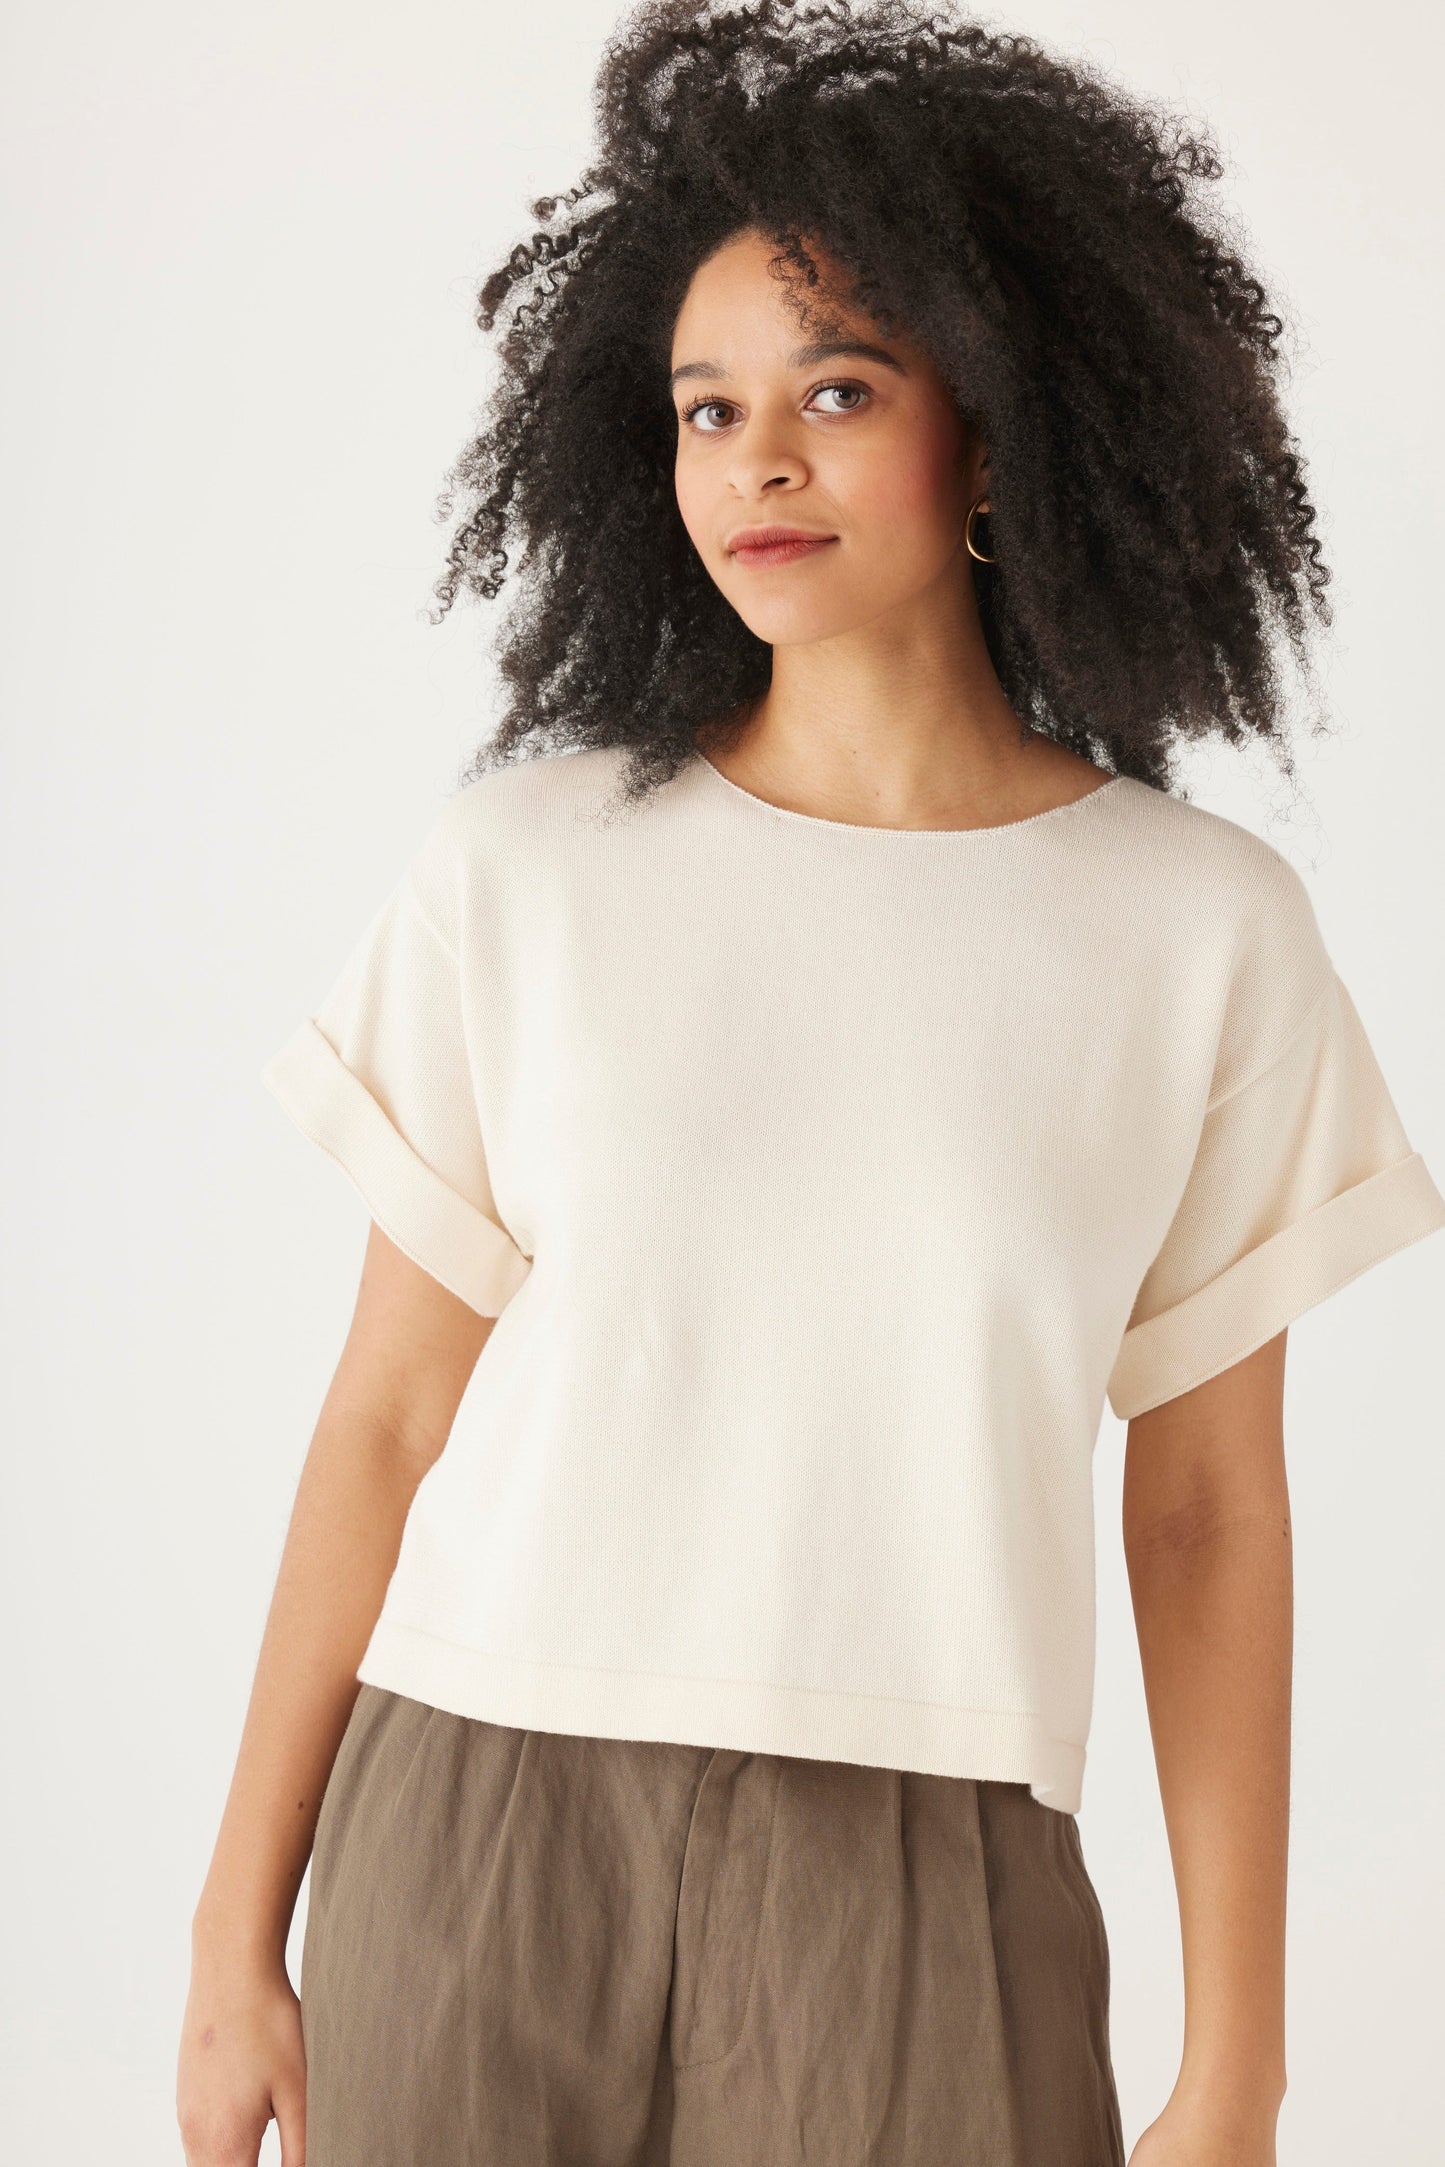 Belle Tee Pima Cotton Knit Tops CHRISTINE ALCALAY   